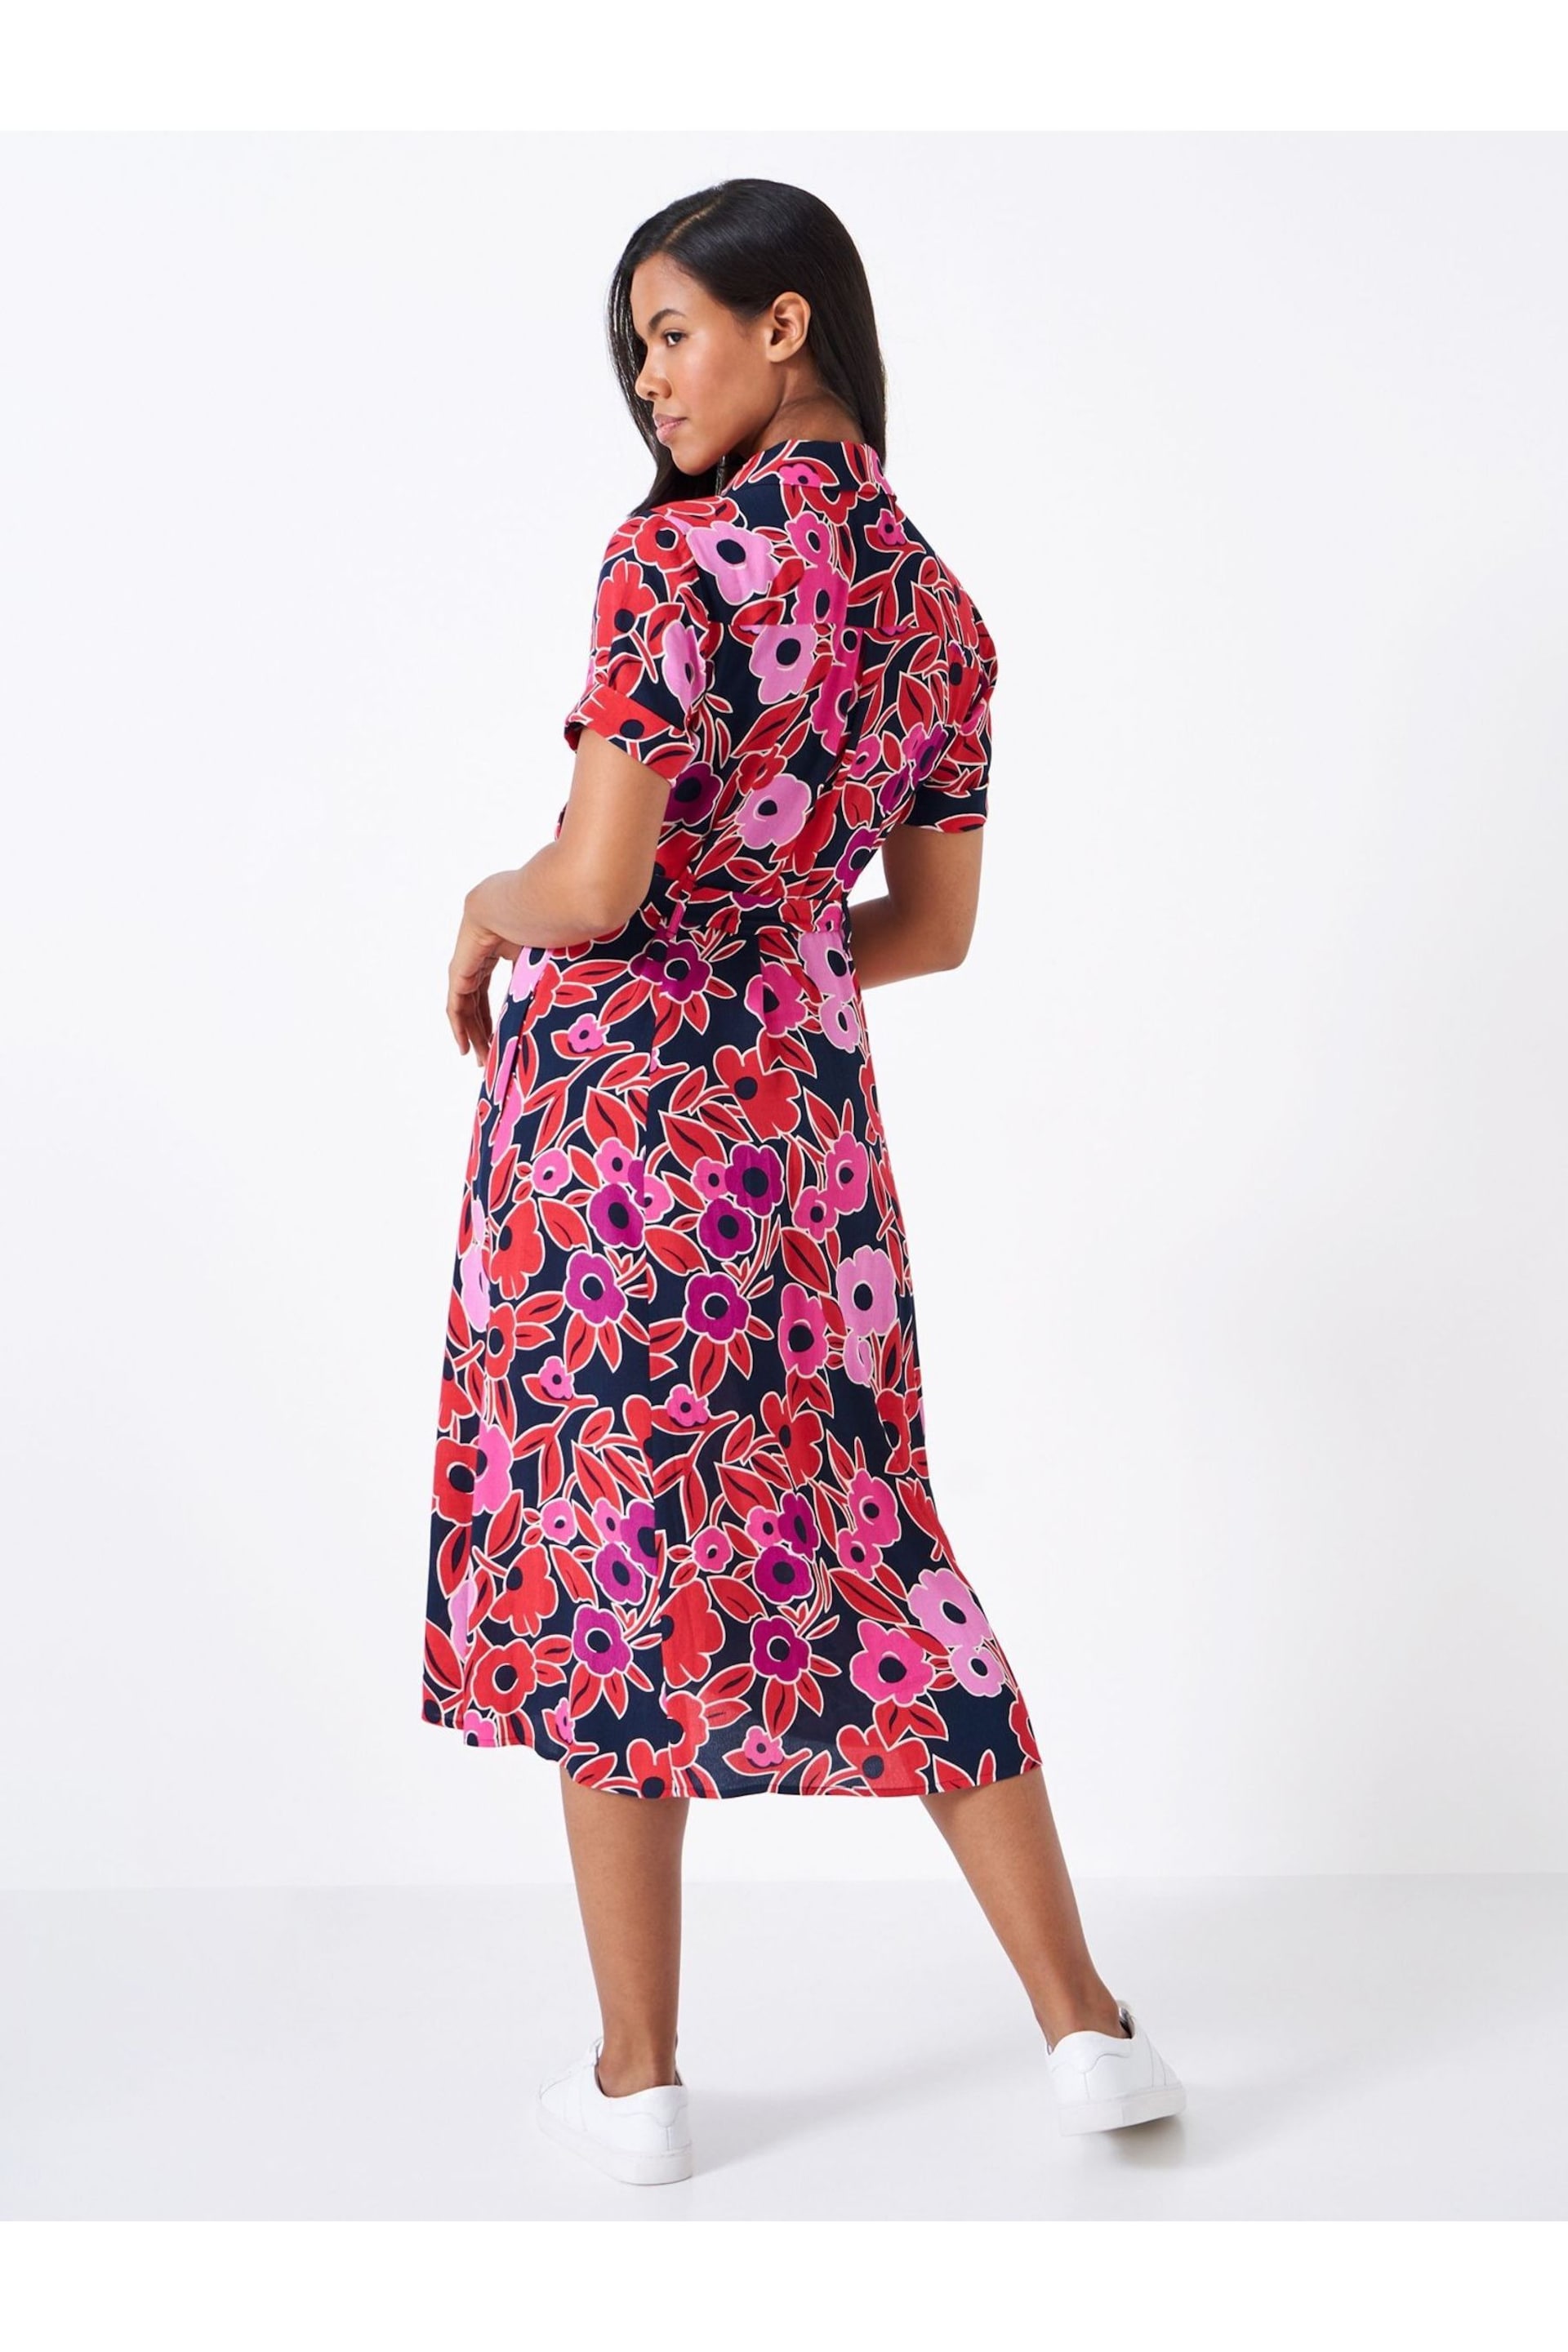 Crew Clothing Sienna Short Sleeve Floral Shirt Dress - Image 2 of 5